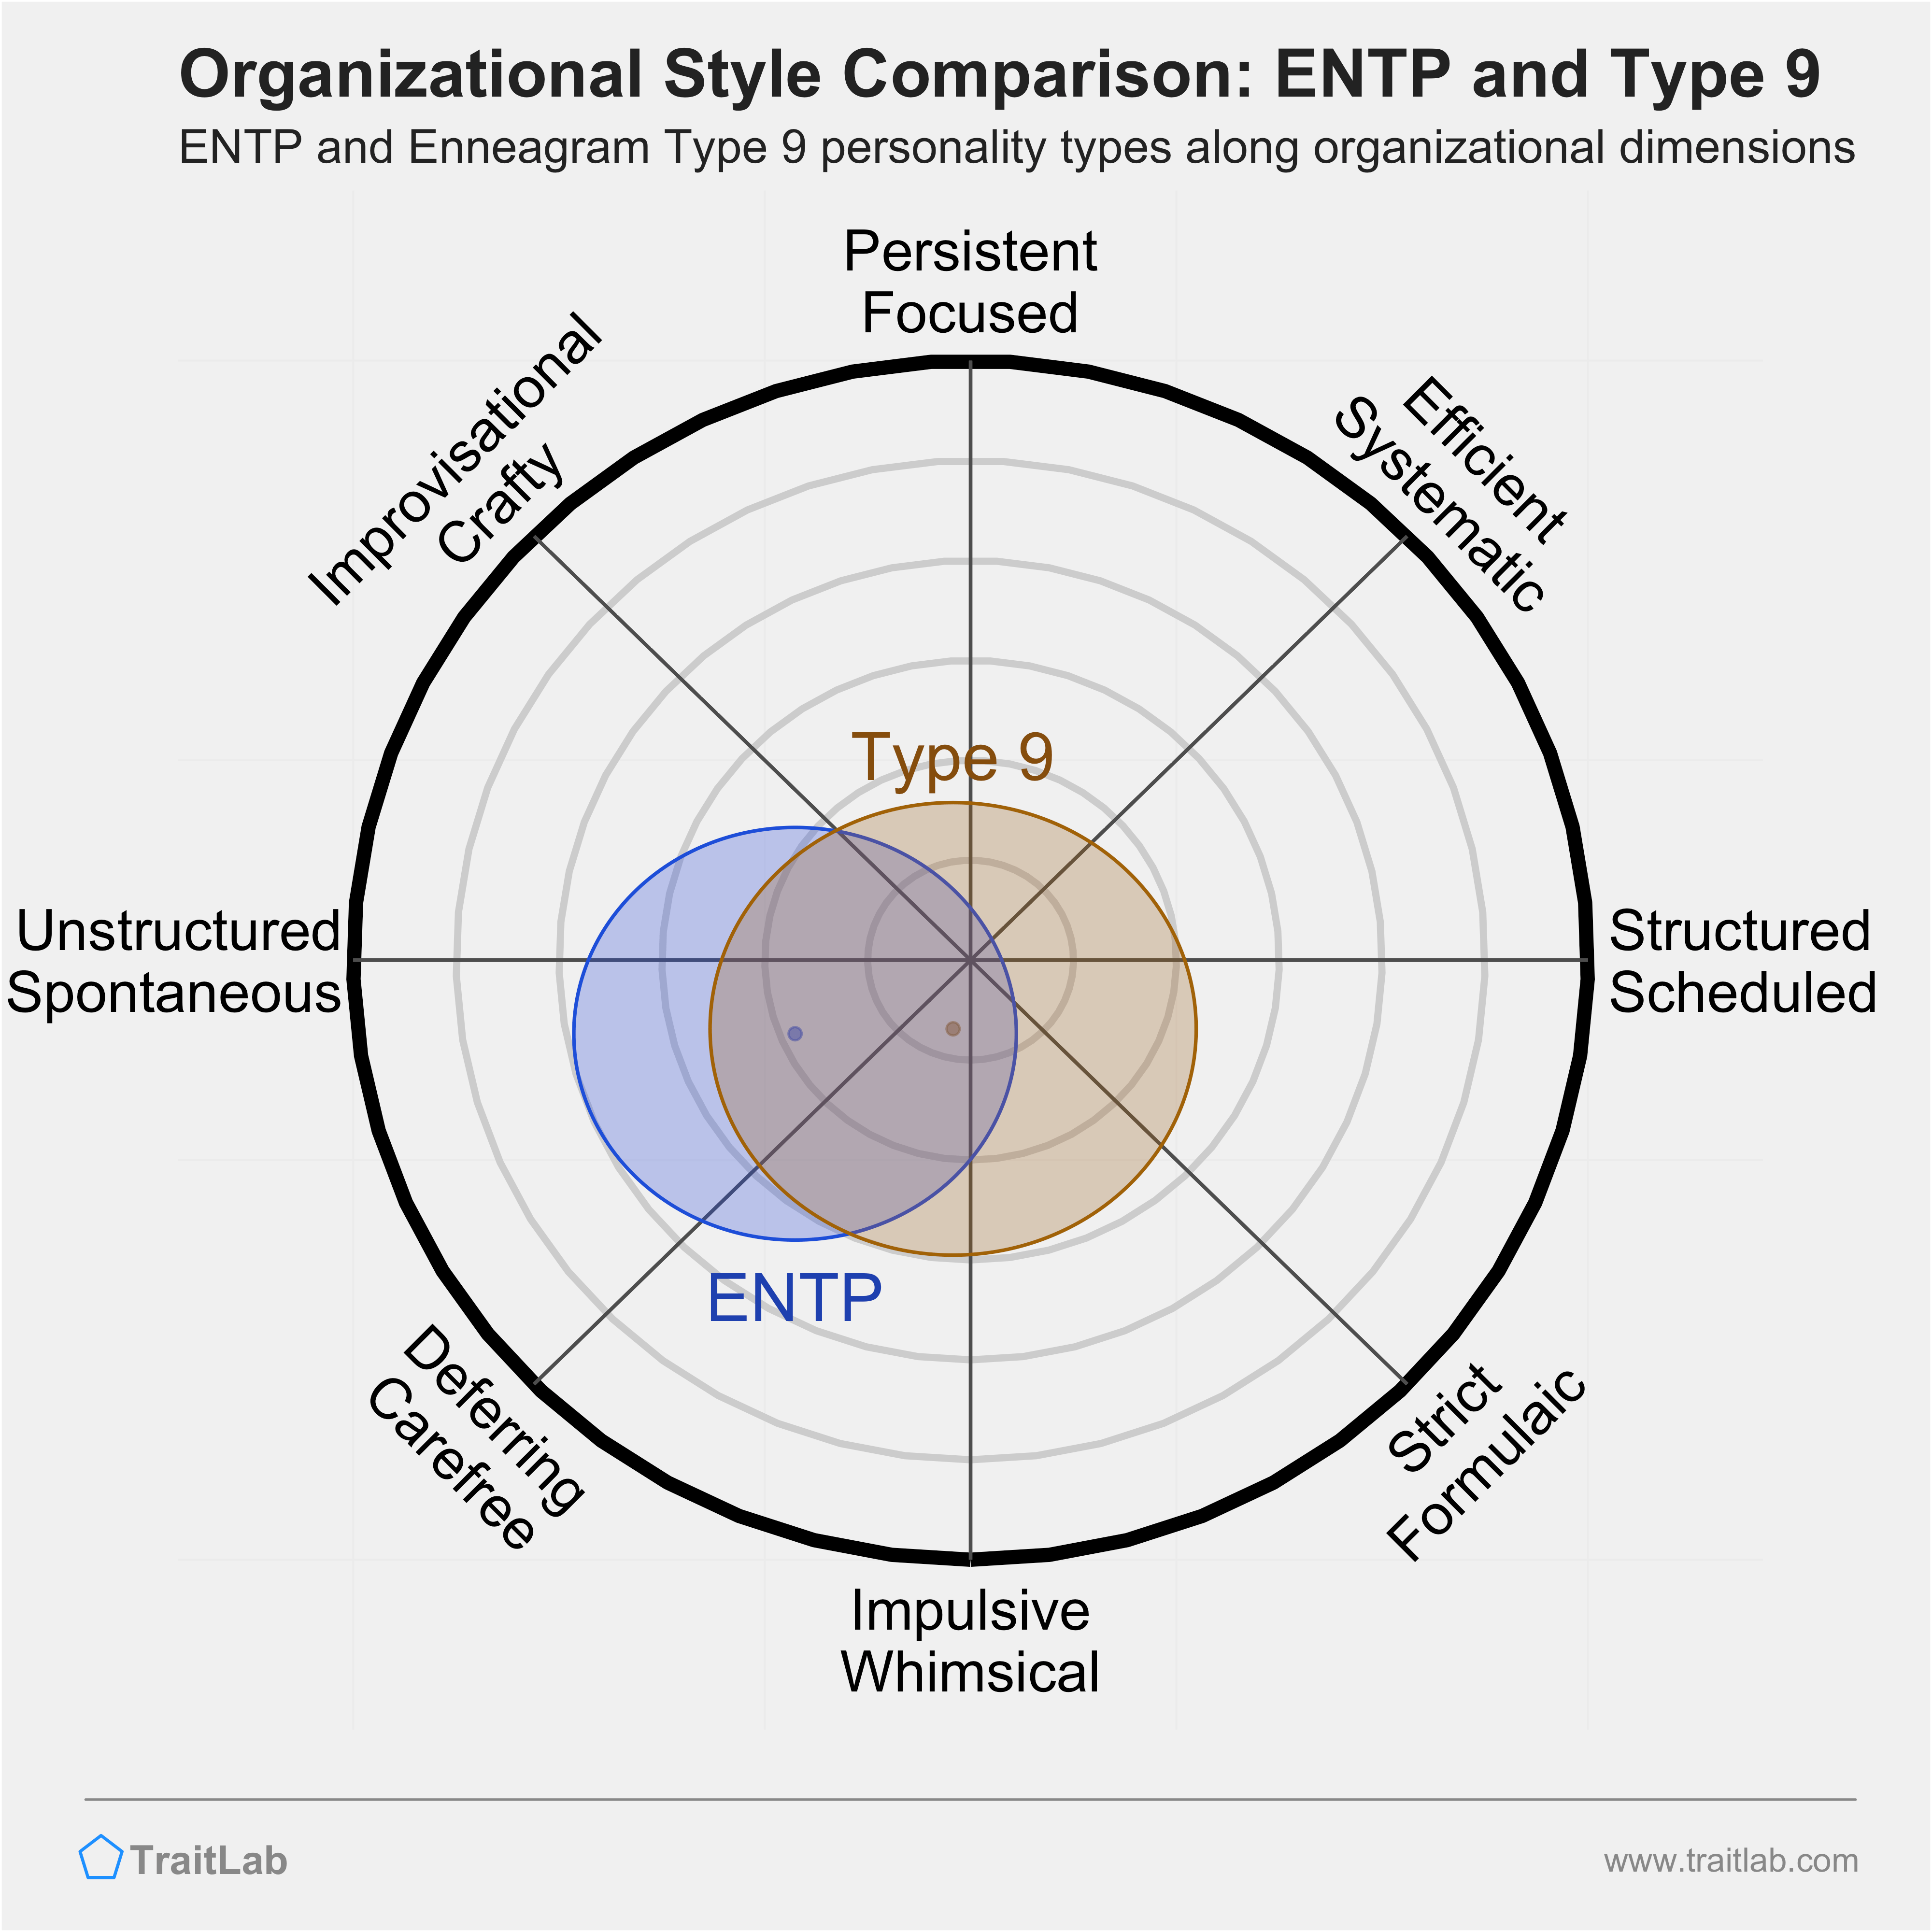 ENTP and Type 9 comparison across organizational dimensions